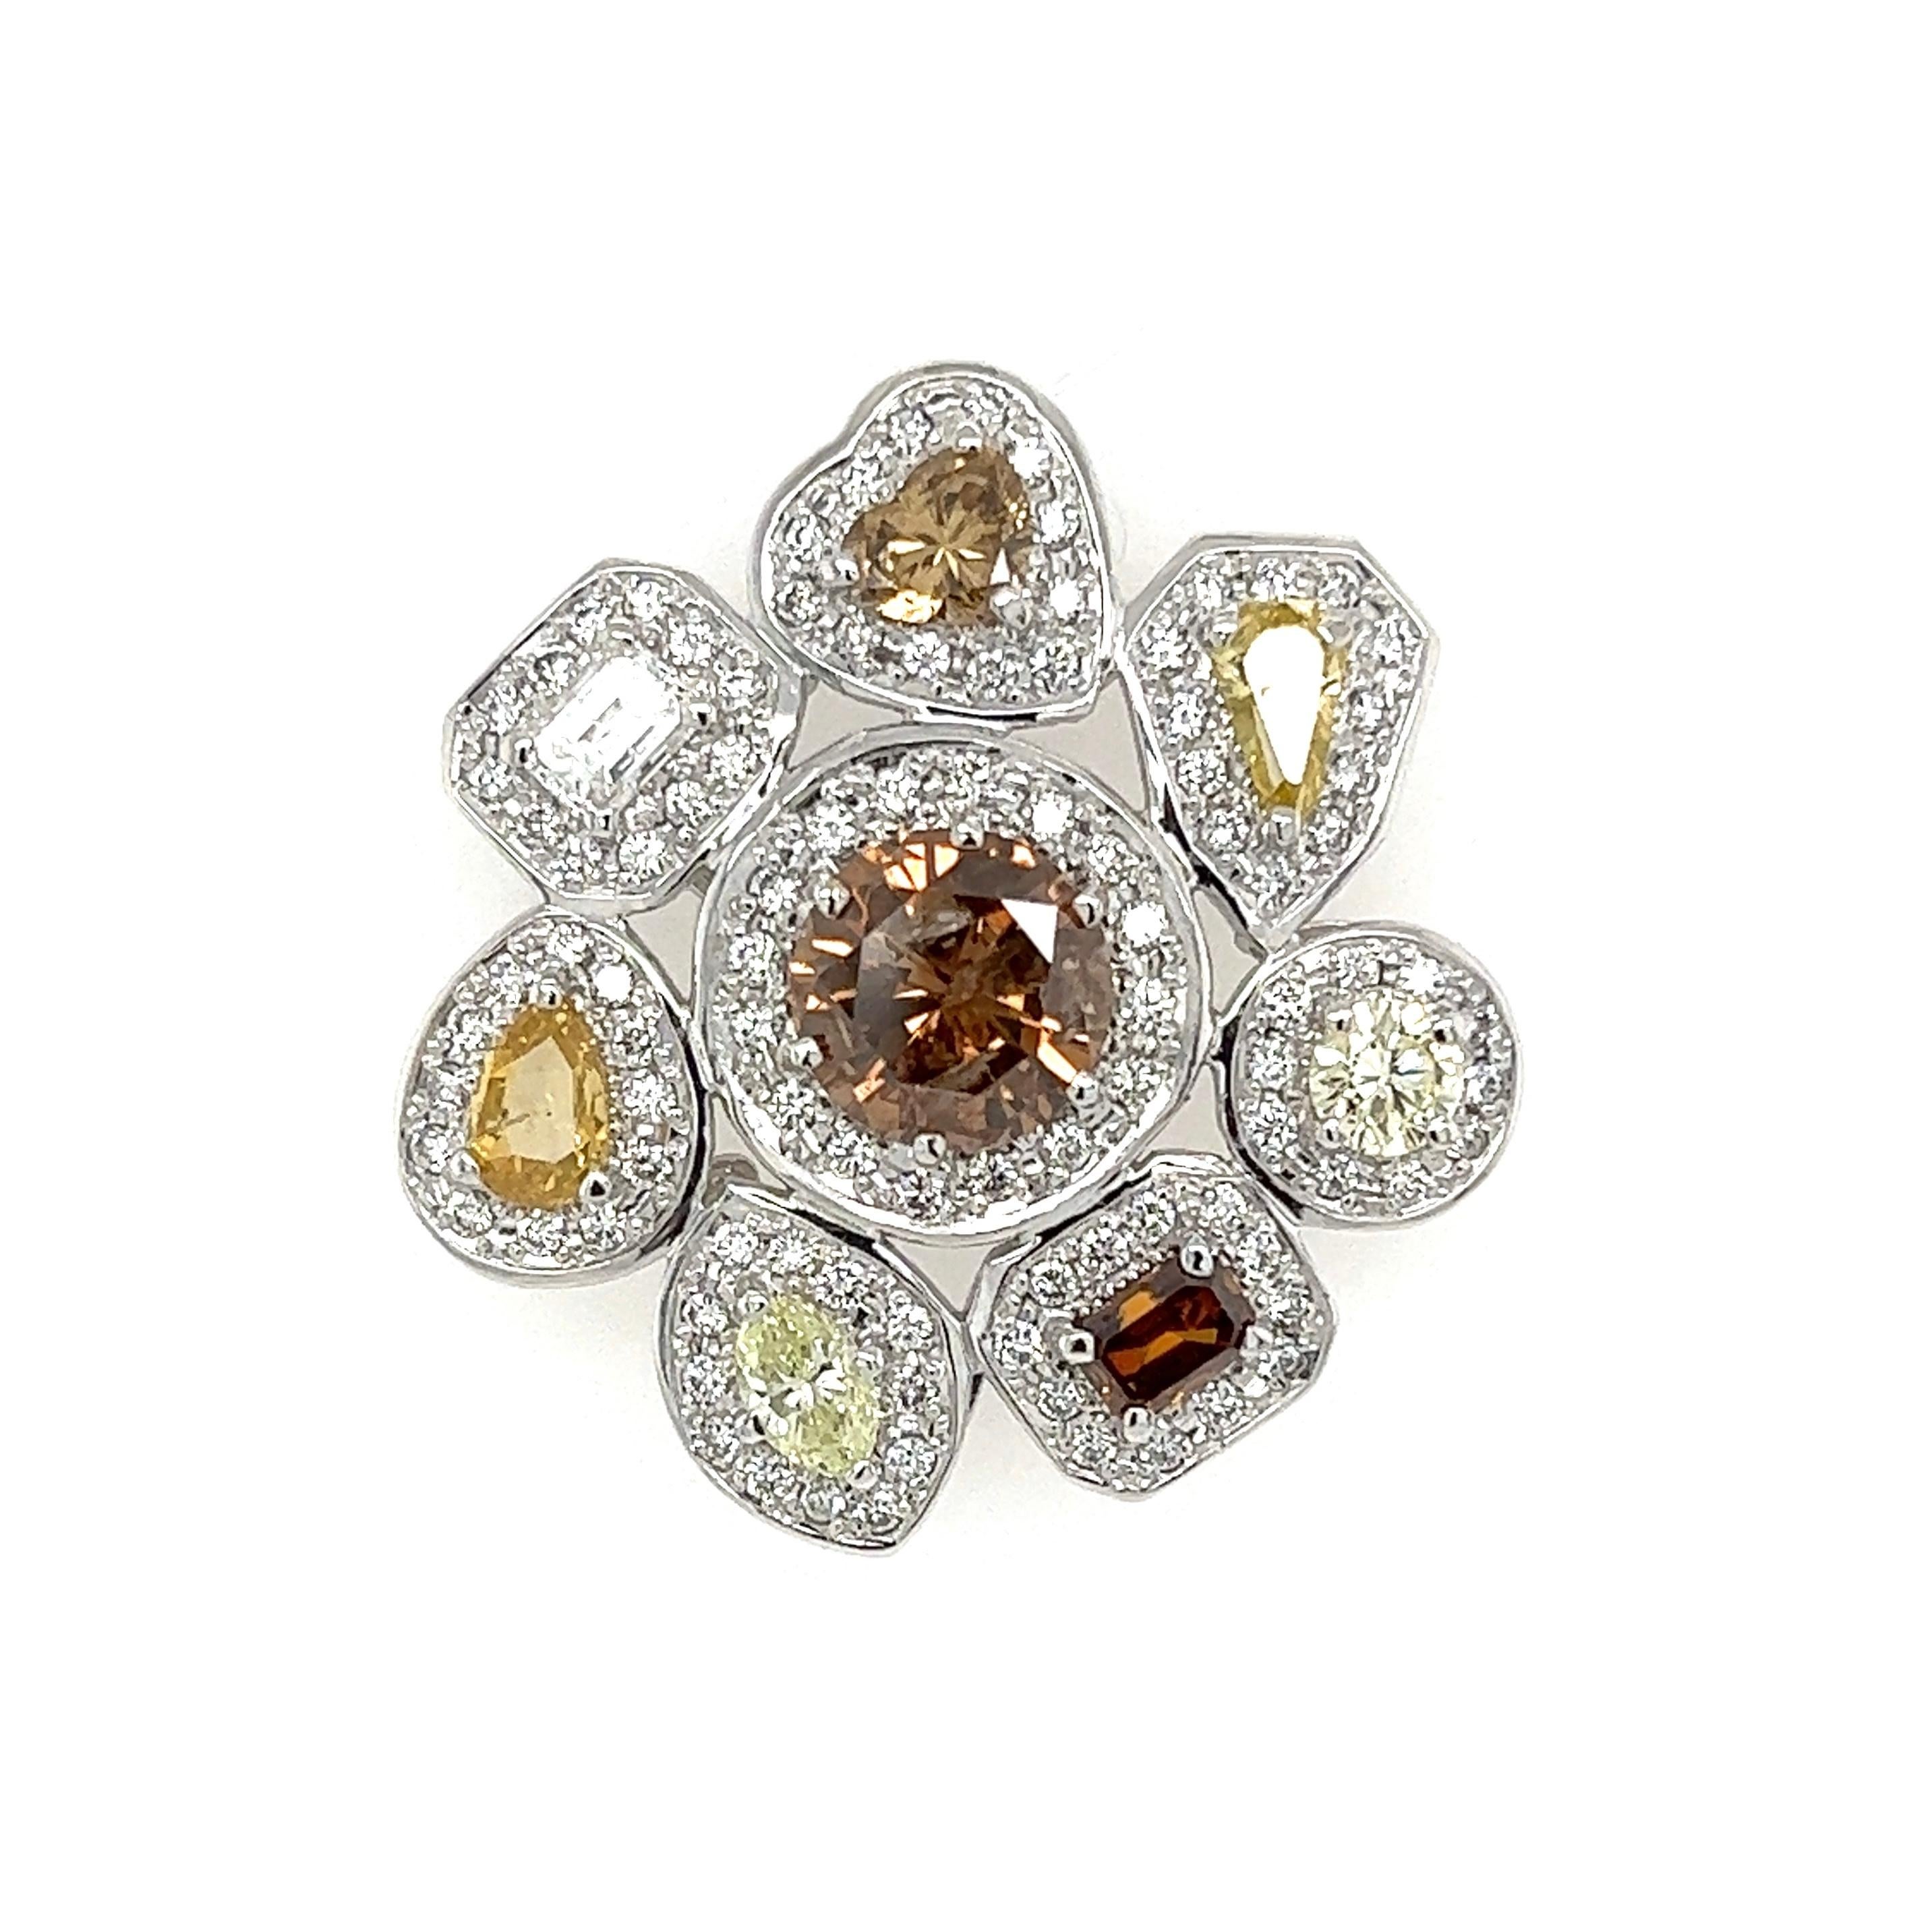 Simply Beautiful! Finely detailed High quality Fancy Color Diamond Cluster Platinum Brooch Pendant. Hand set with 1 Round Brown Diamond approx. 2.76 Carat, 7 Fancy shape Diamonds approx. 3.11tcw and numerous white round Brilliant Diamonds approx.